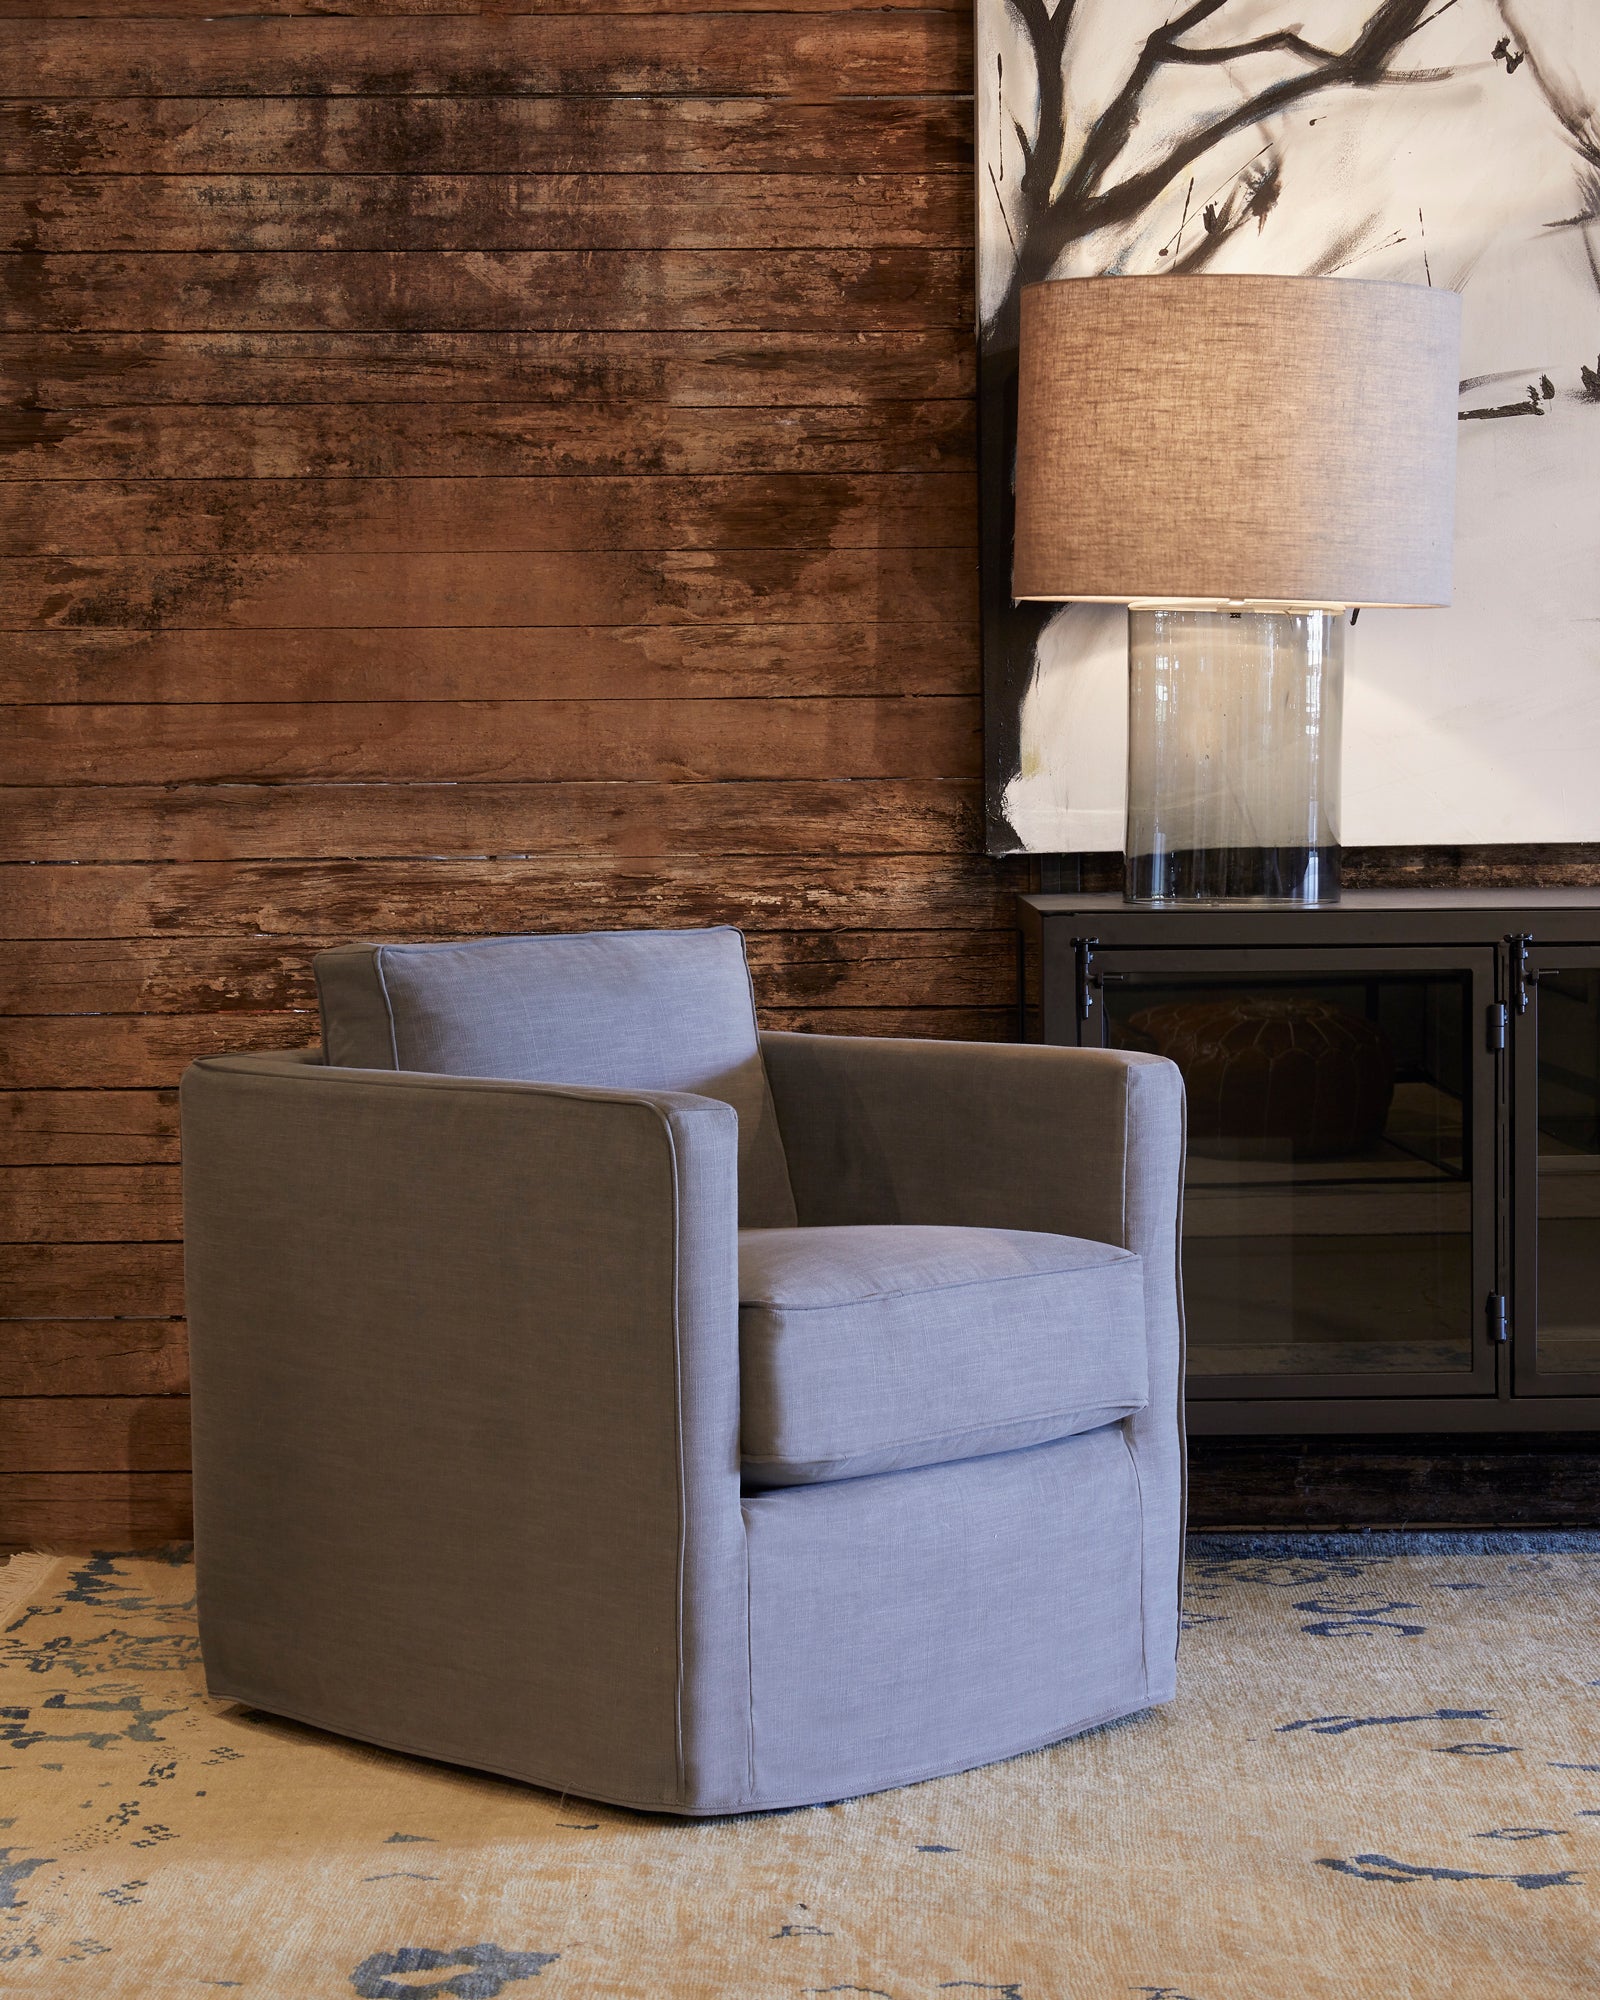  Vista Mini chair in Molino Slate next to a dark credenza. In the background is a wood wall with a painting of tree branches hanging from it. Photographed in Molino Slate. 